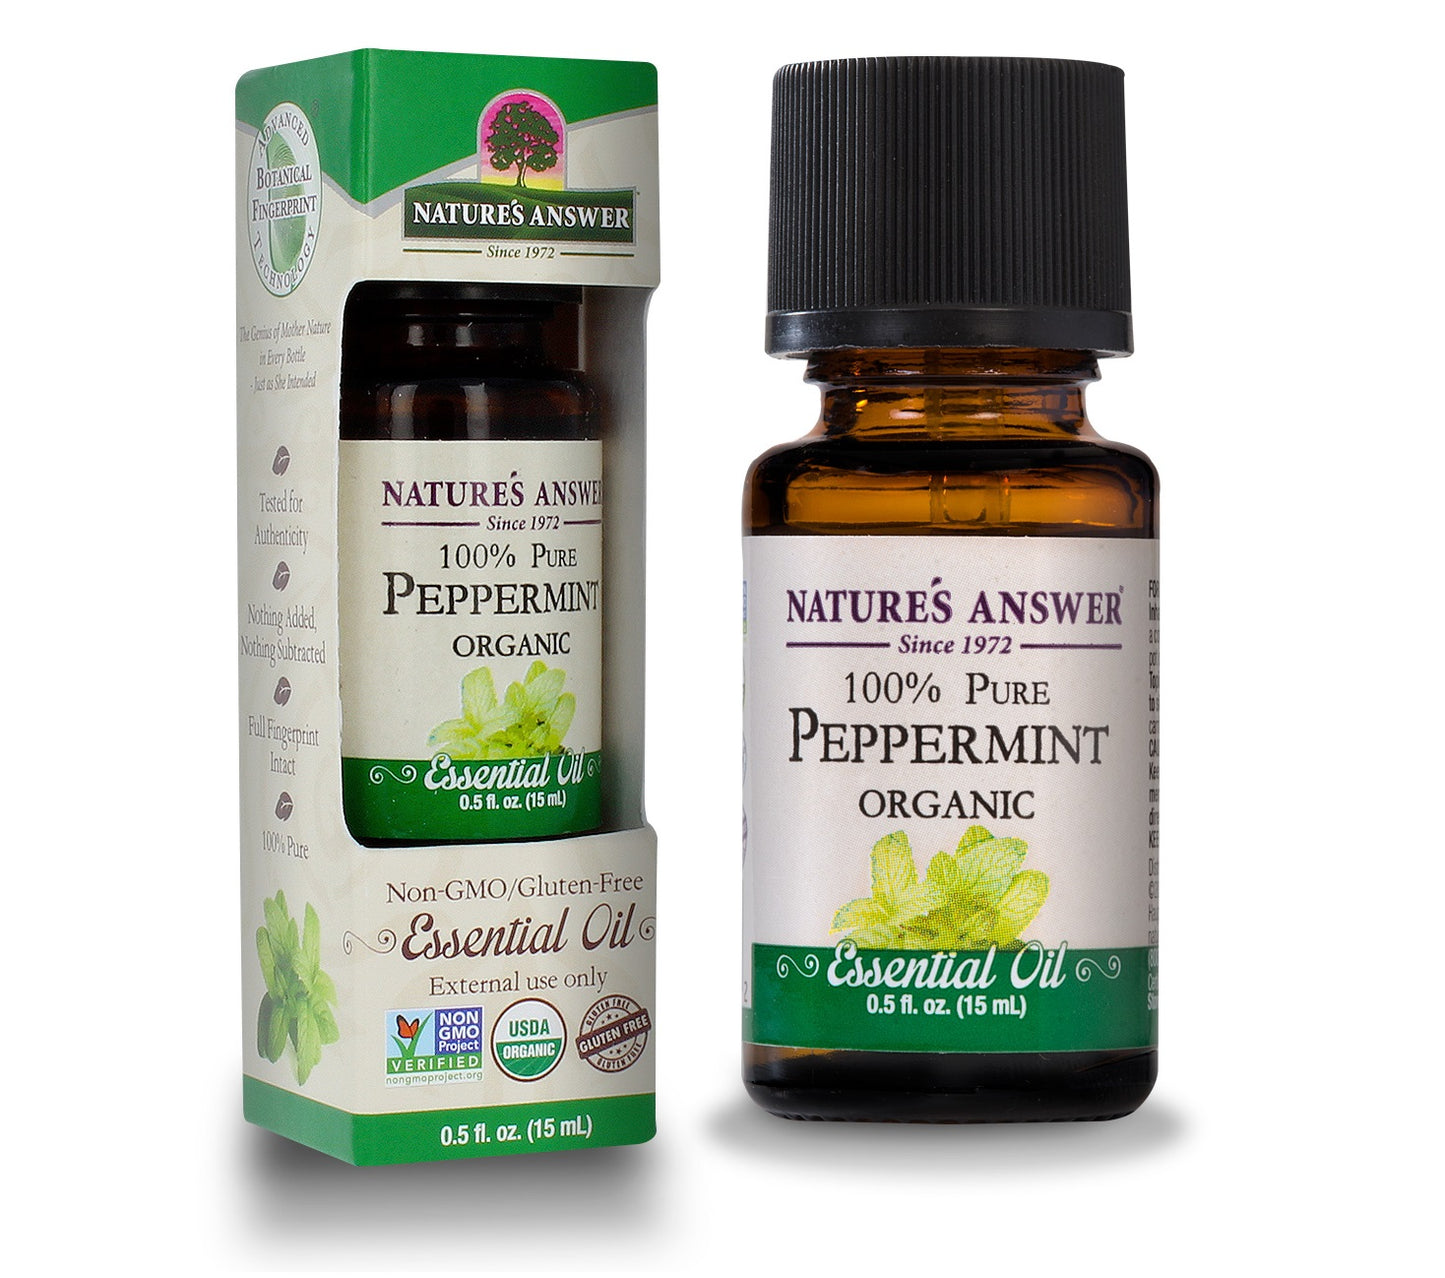 Nature's Answer Peppermint Essential Oil Organic